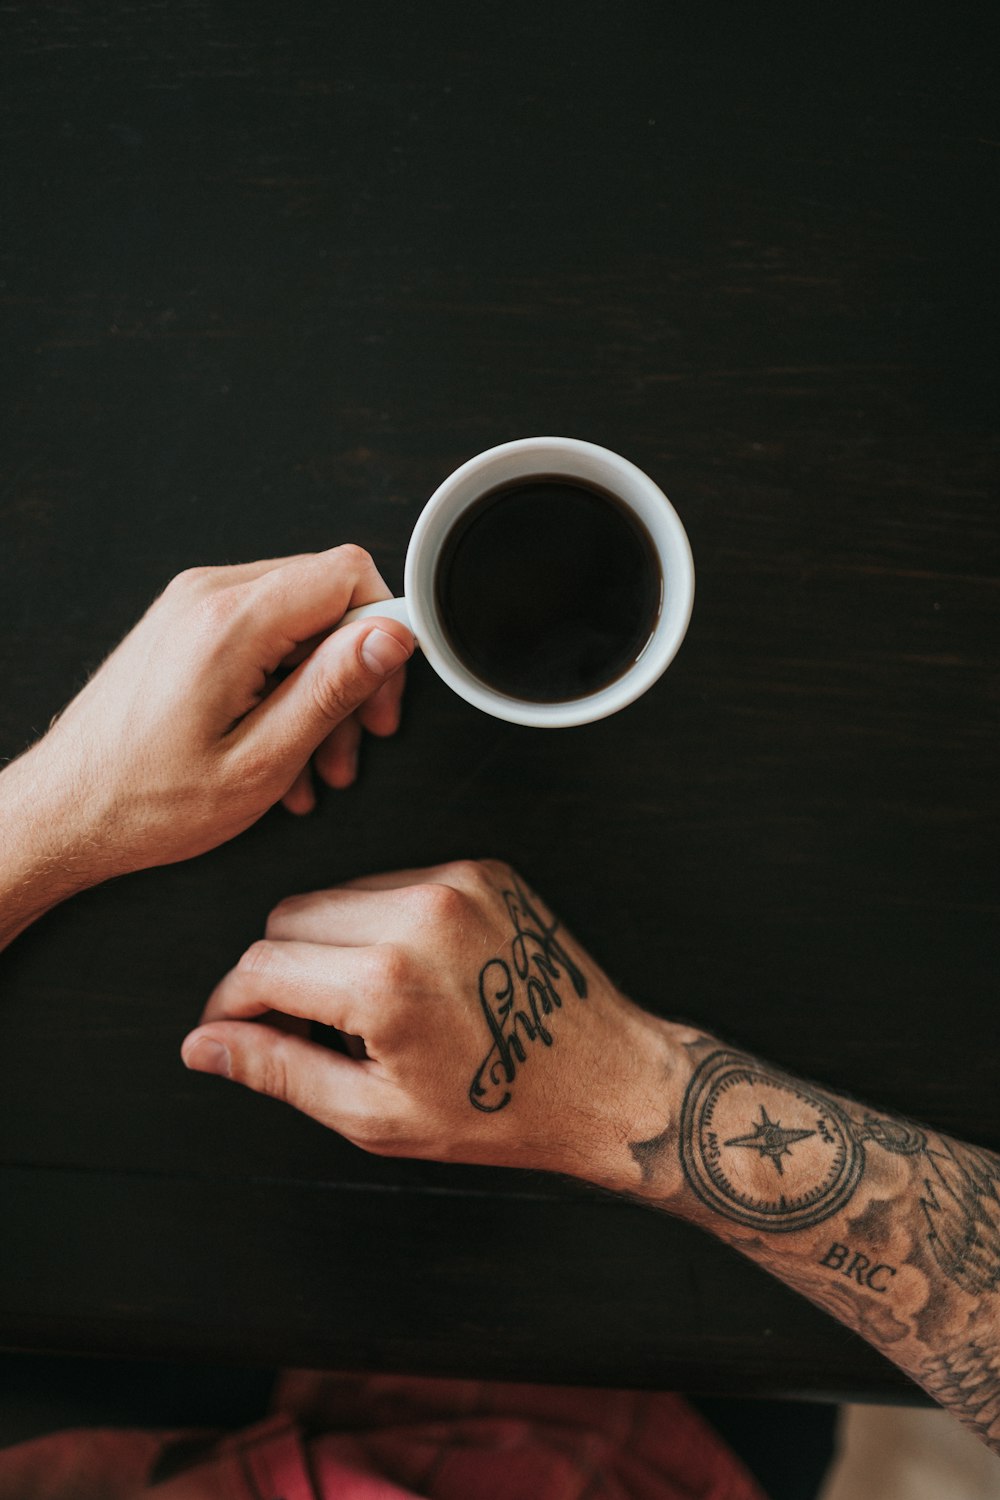 1000+ Hand Tattoo Pictures  Download Free Images on Unsplash